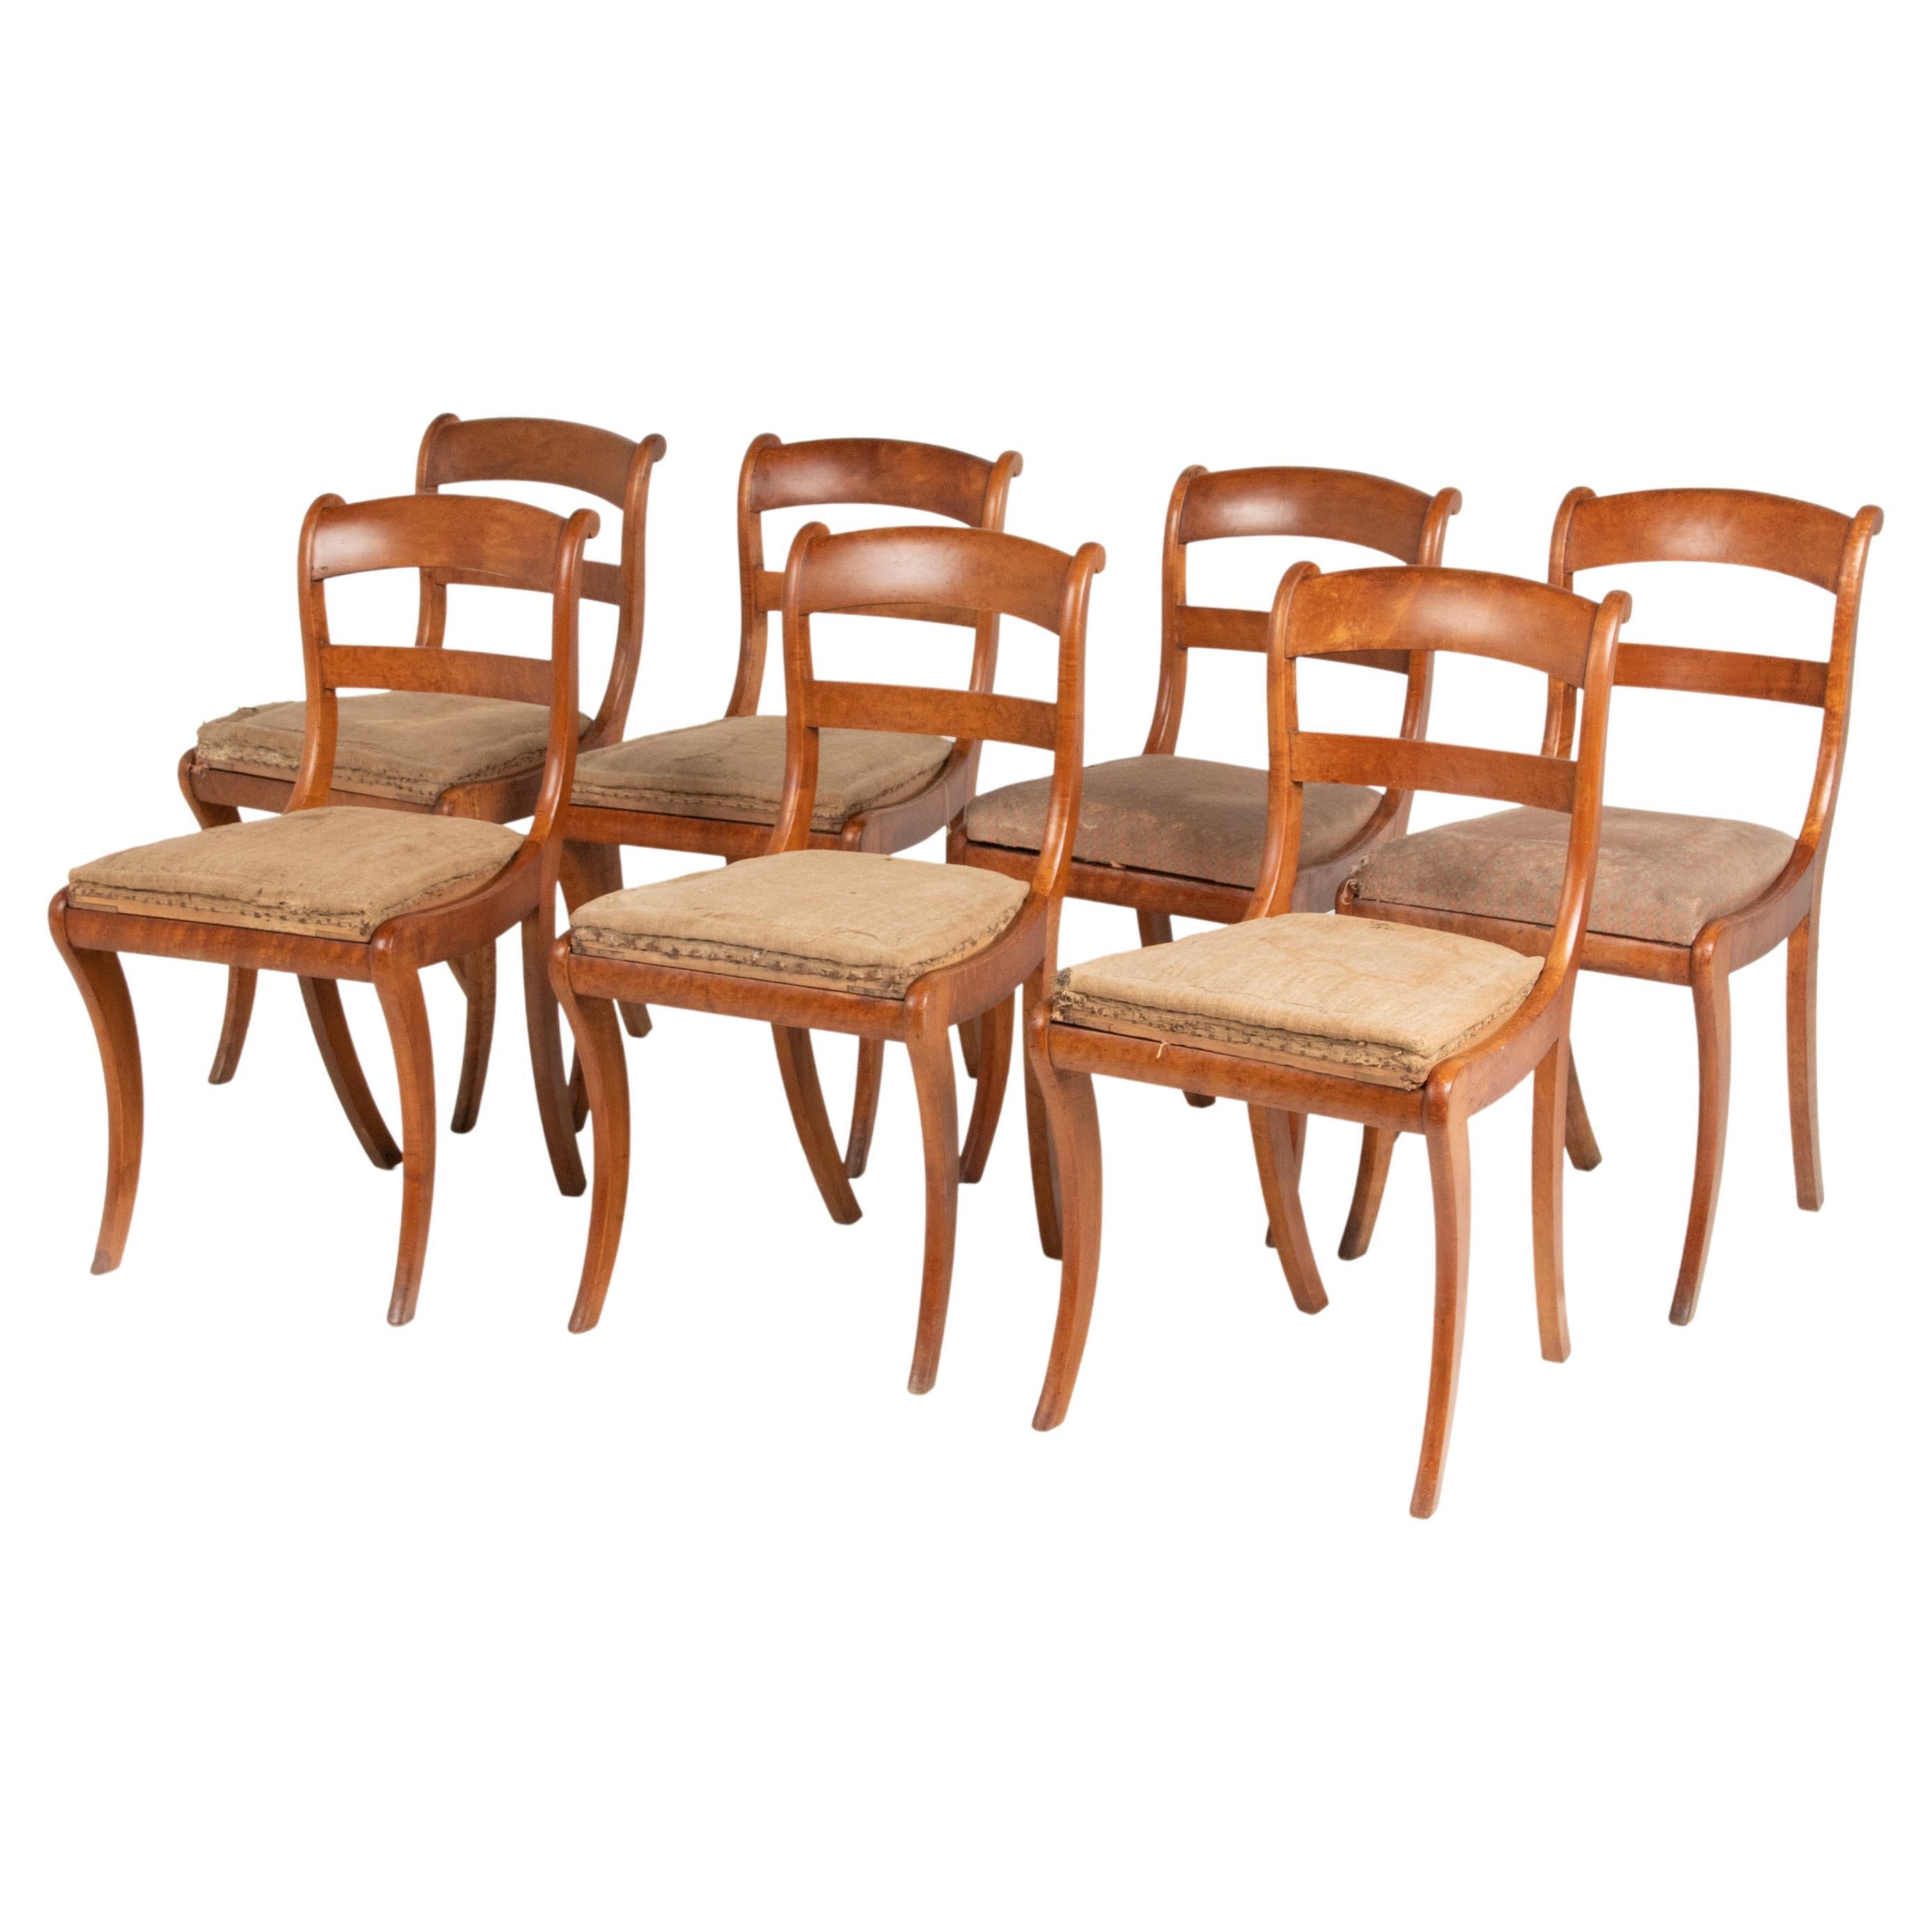 Early 19th Century Charles X Birds-Eye Maple Wood Dining Chairs